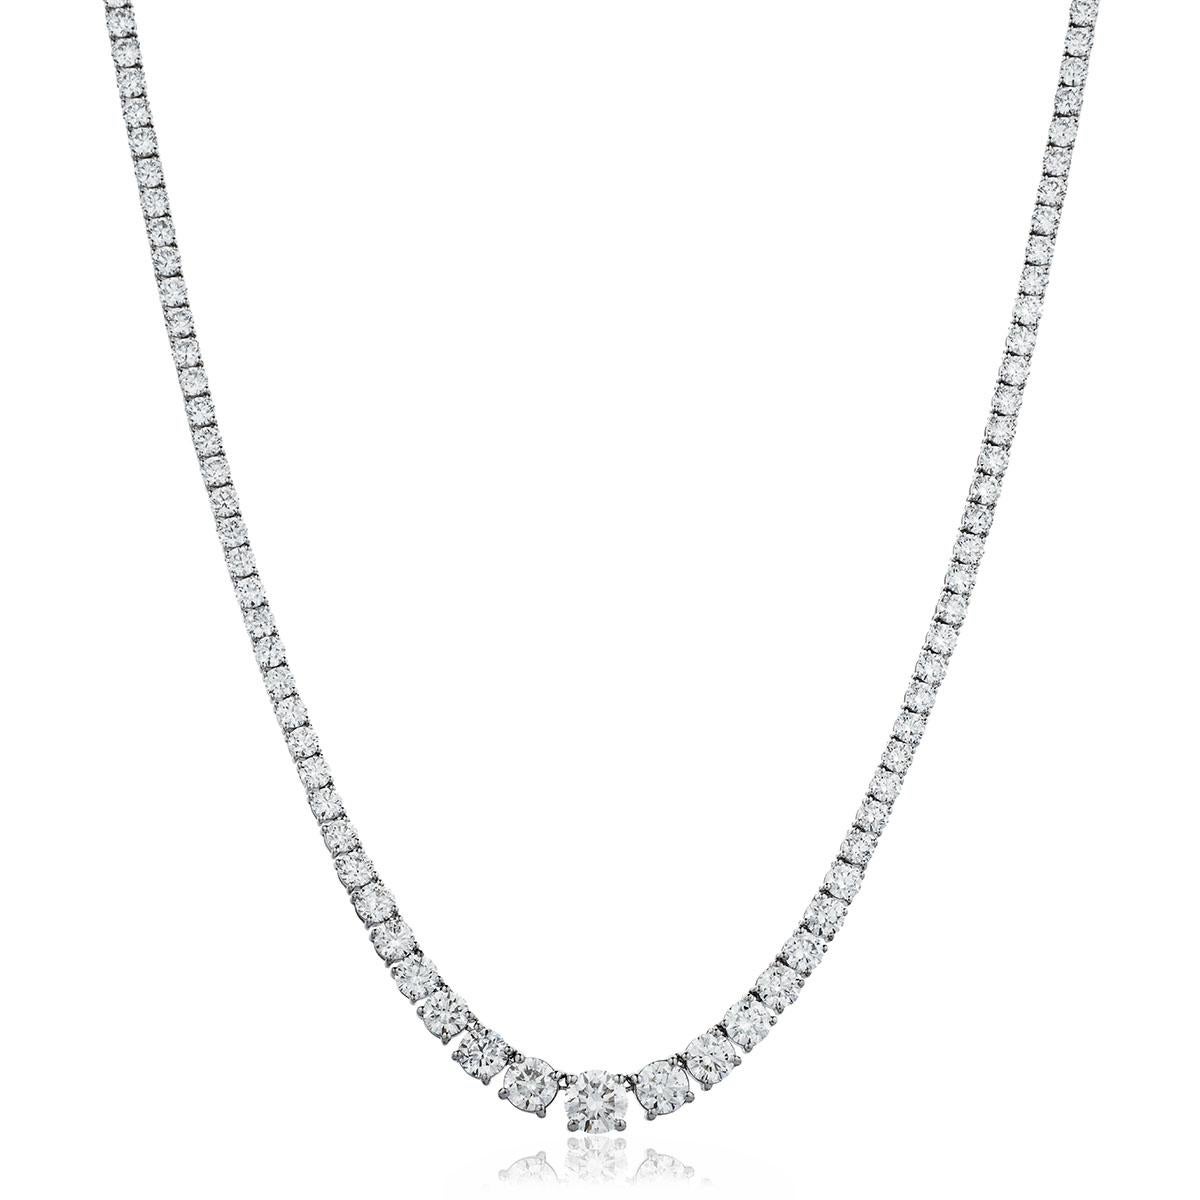 10.45 Carat Diamond Line Necklace 18 Karat White Gold 4 Claws Set Riviera Tennis In New Condition For Sale In London, GB